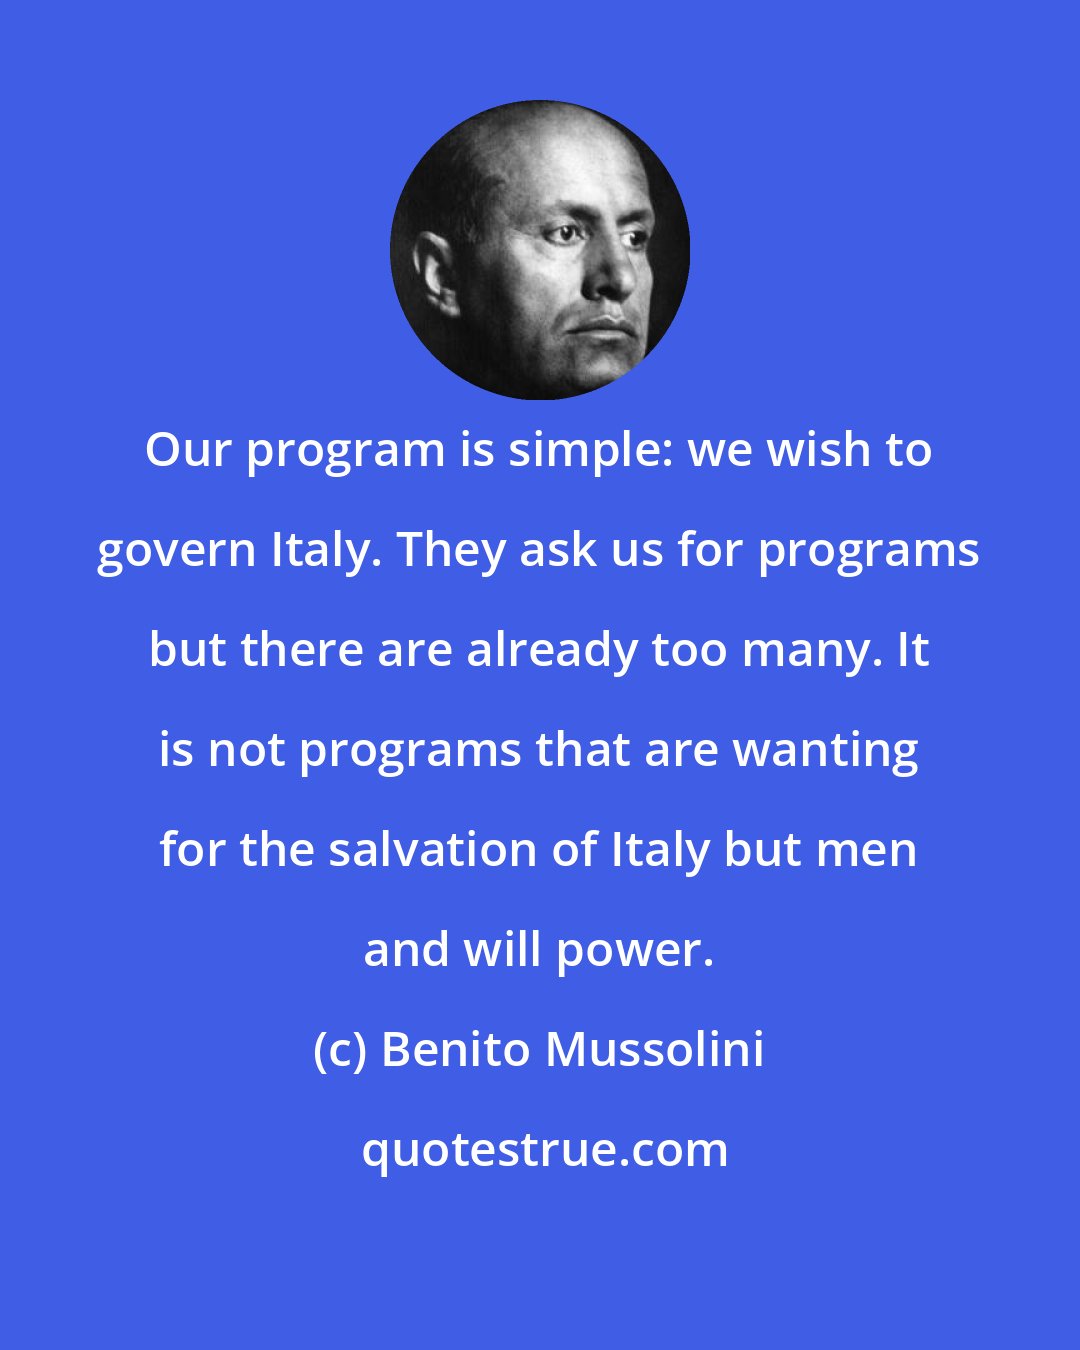 Benito Mussolini: Our program is simple: we wish to govern Italy. They ask us for programs but there are already too many. It is not programs that are wanting for the salvation of Italy but men and will power.